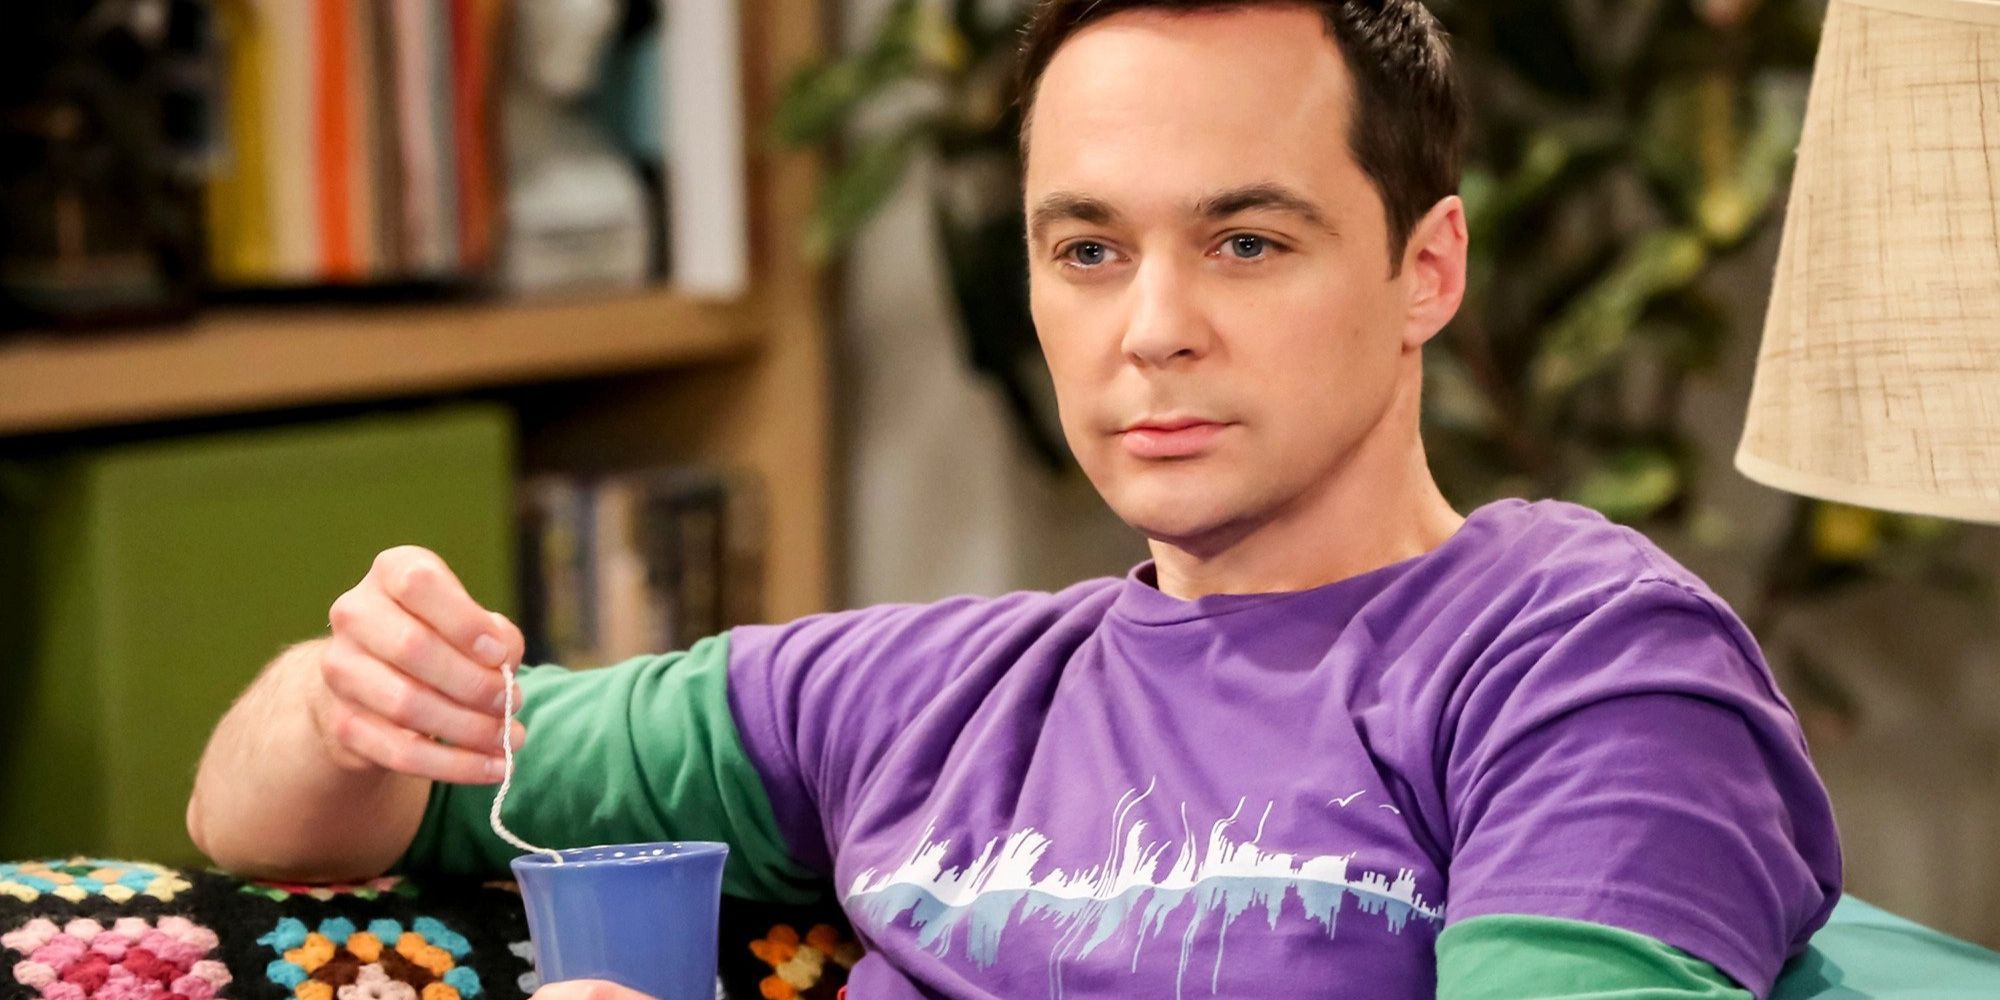 Sheldon is sitting on the couch drinking a hot drink